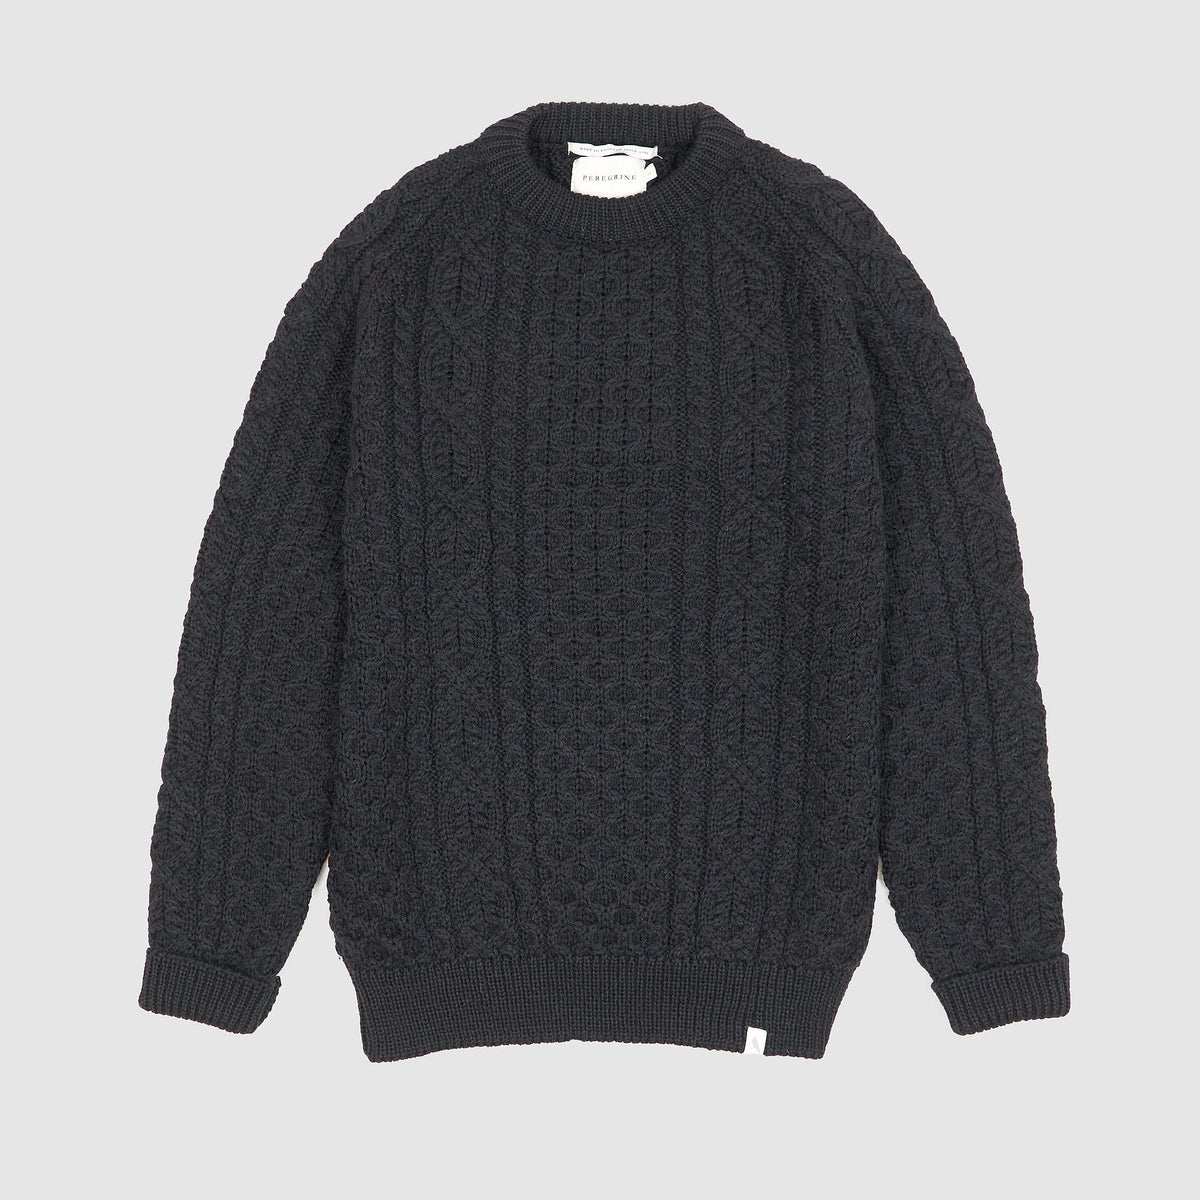 Peregrine Cable Knit Wool Pullover